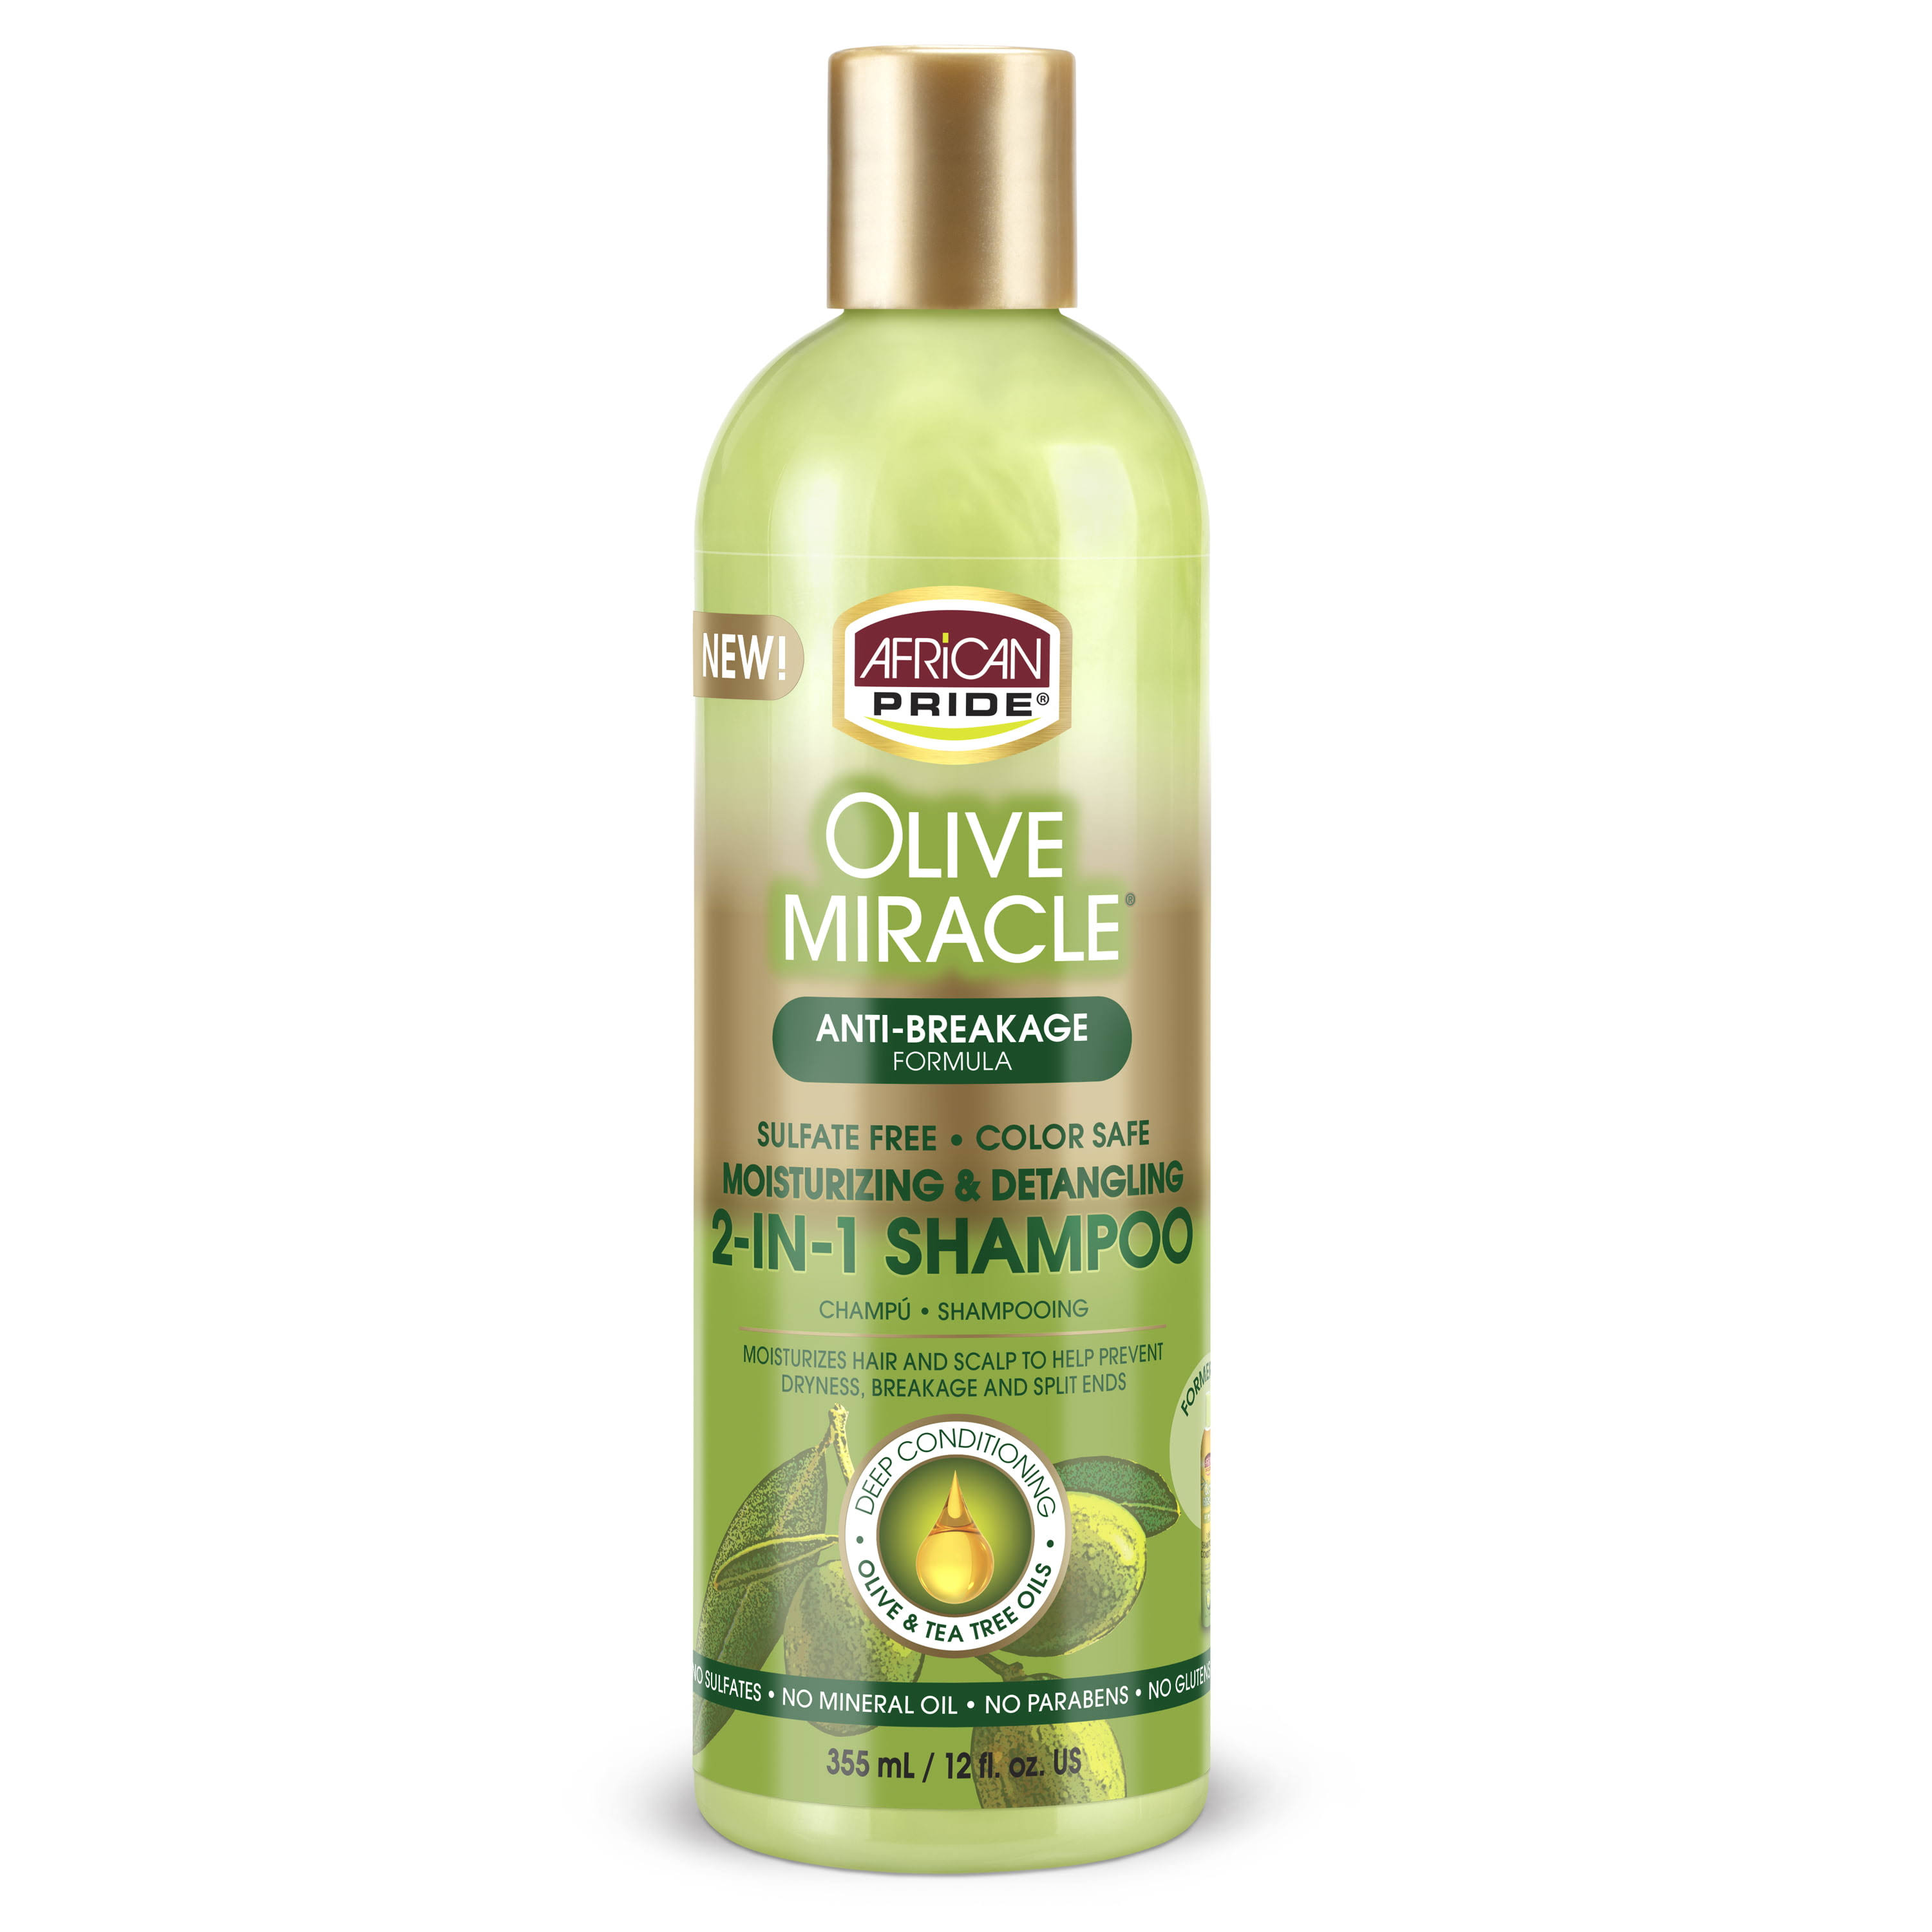 African Pride Olive Miracle Anti-Breakage Formula 2-in-1 Shampoo & Conditioner